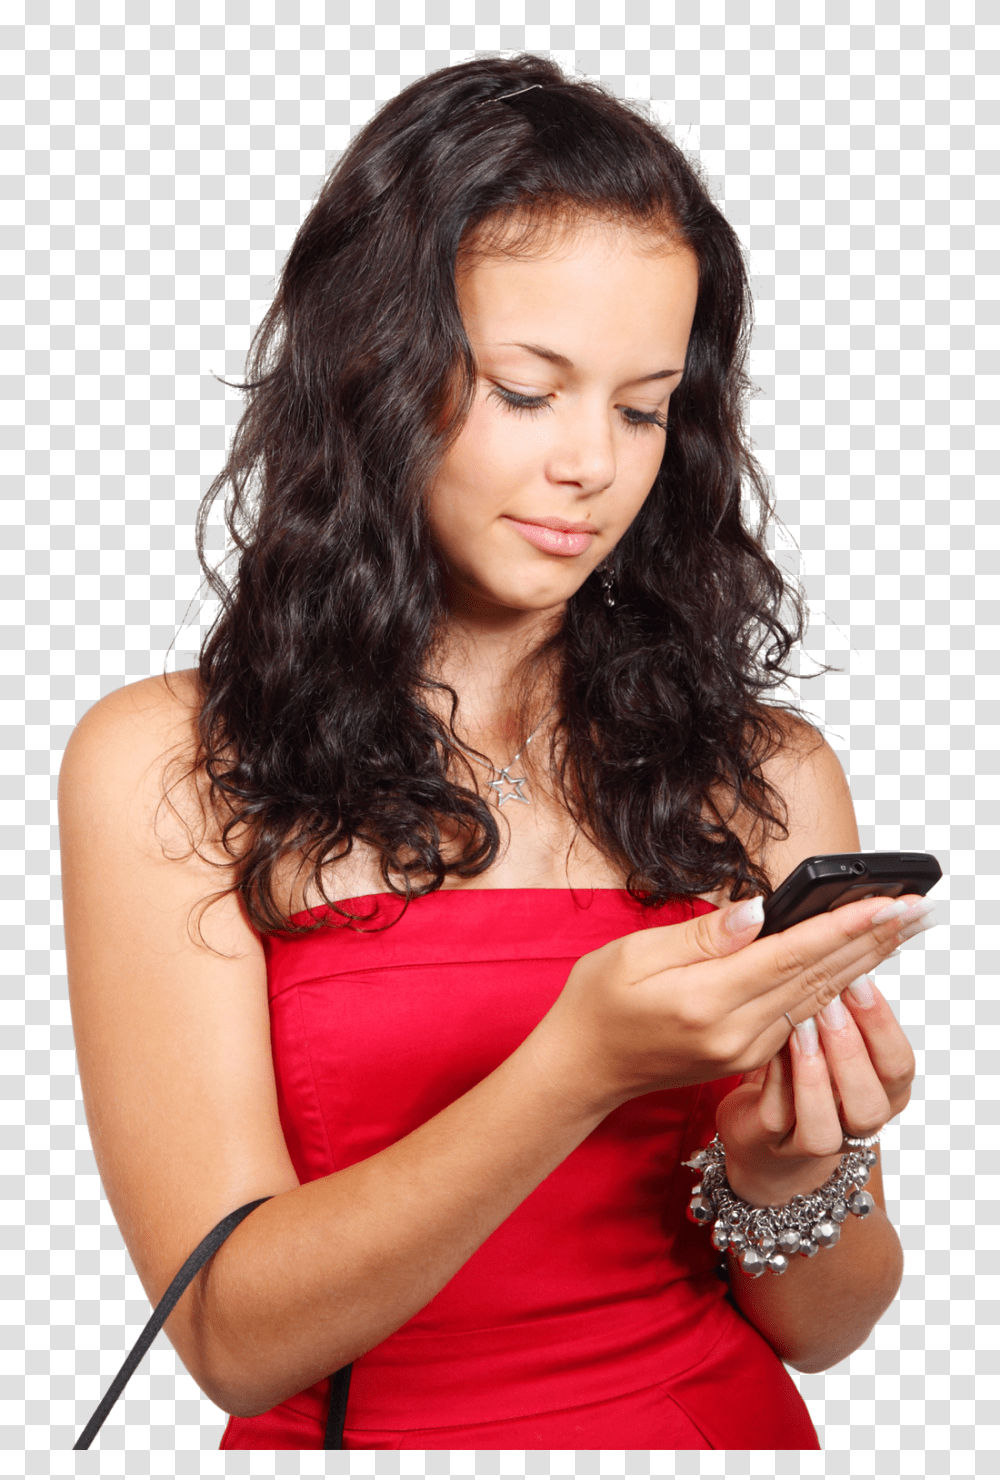 Girl Using Mobile Phone Image Girl Holding Phone, Texting, Hand-Held Computer, Electronics, Cell Phone Transparent Png